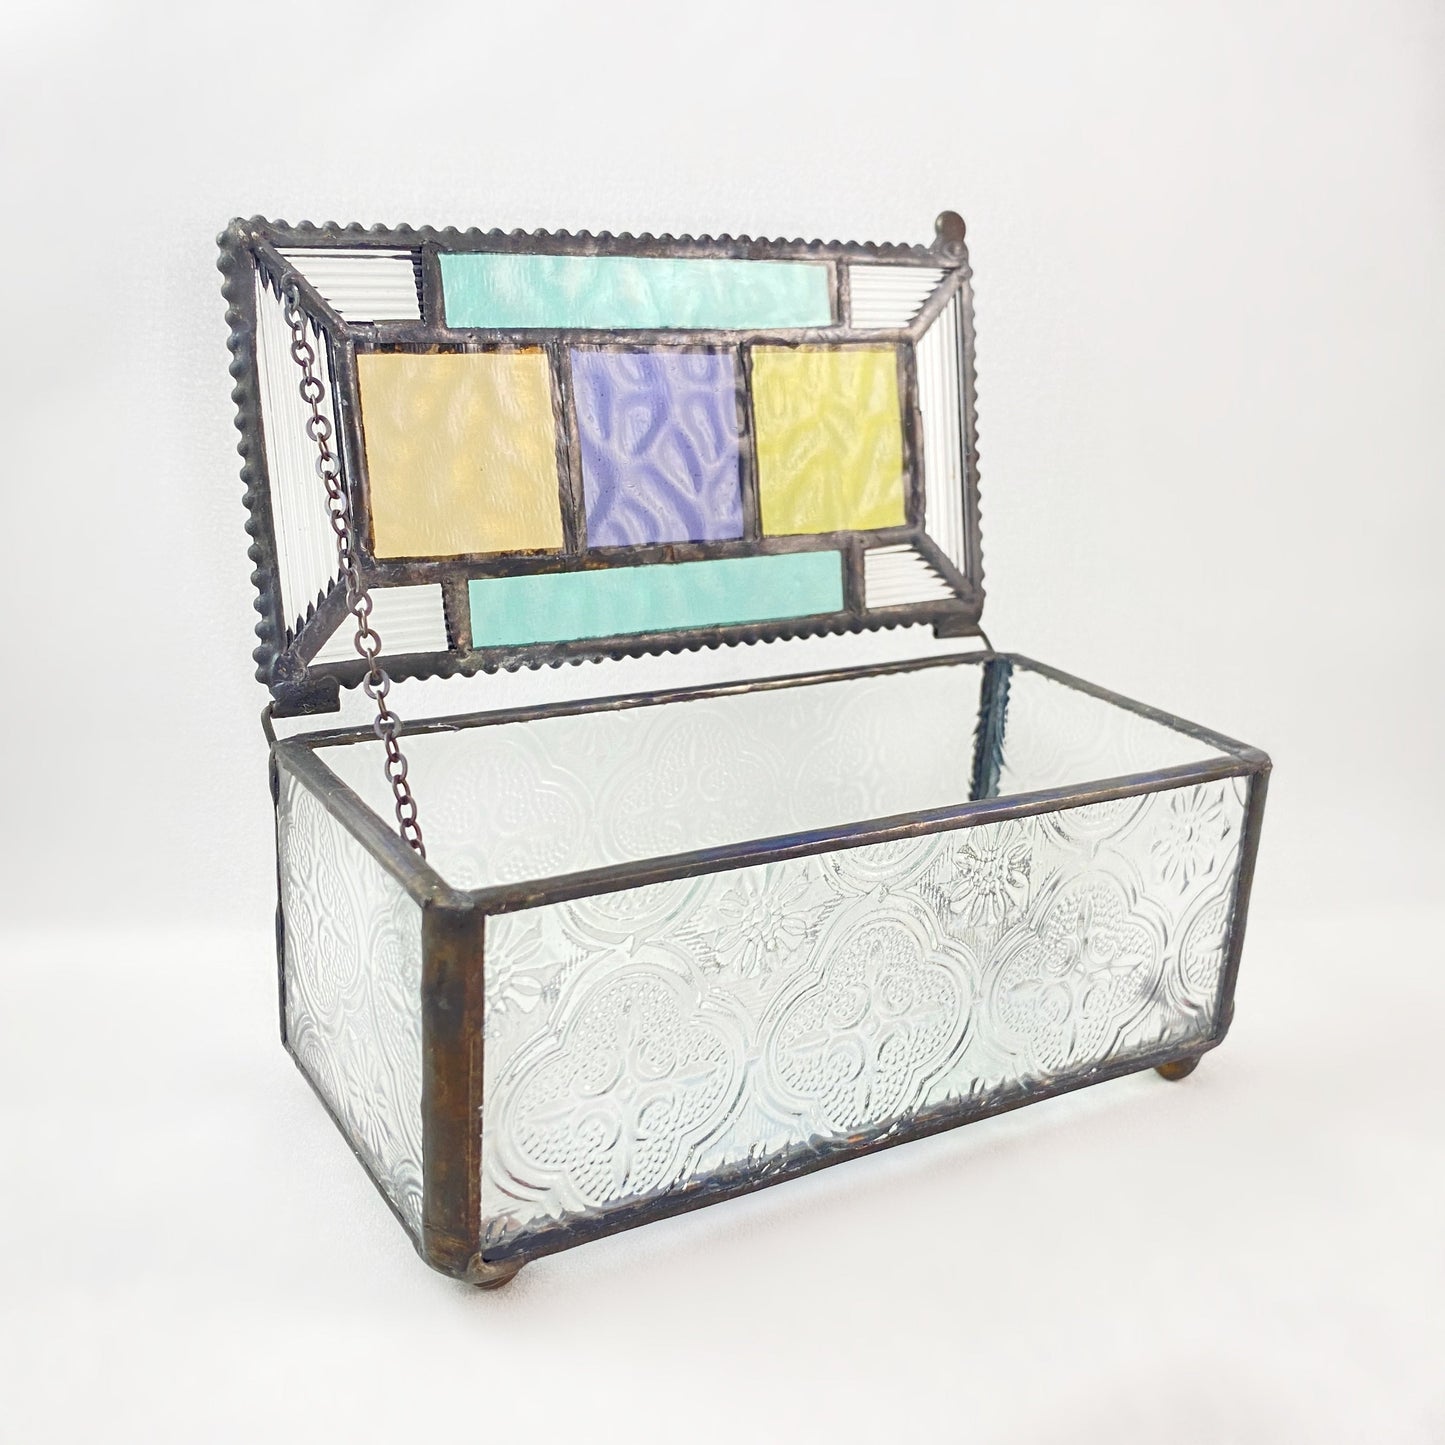 Stained Glass Jewelry Box - Jewelry Box with Lace Detailing